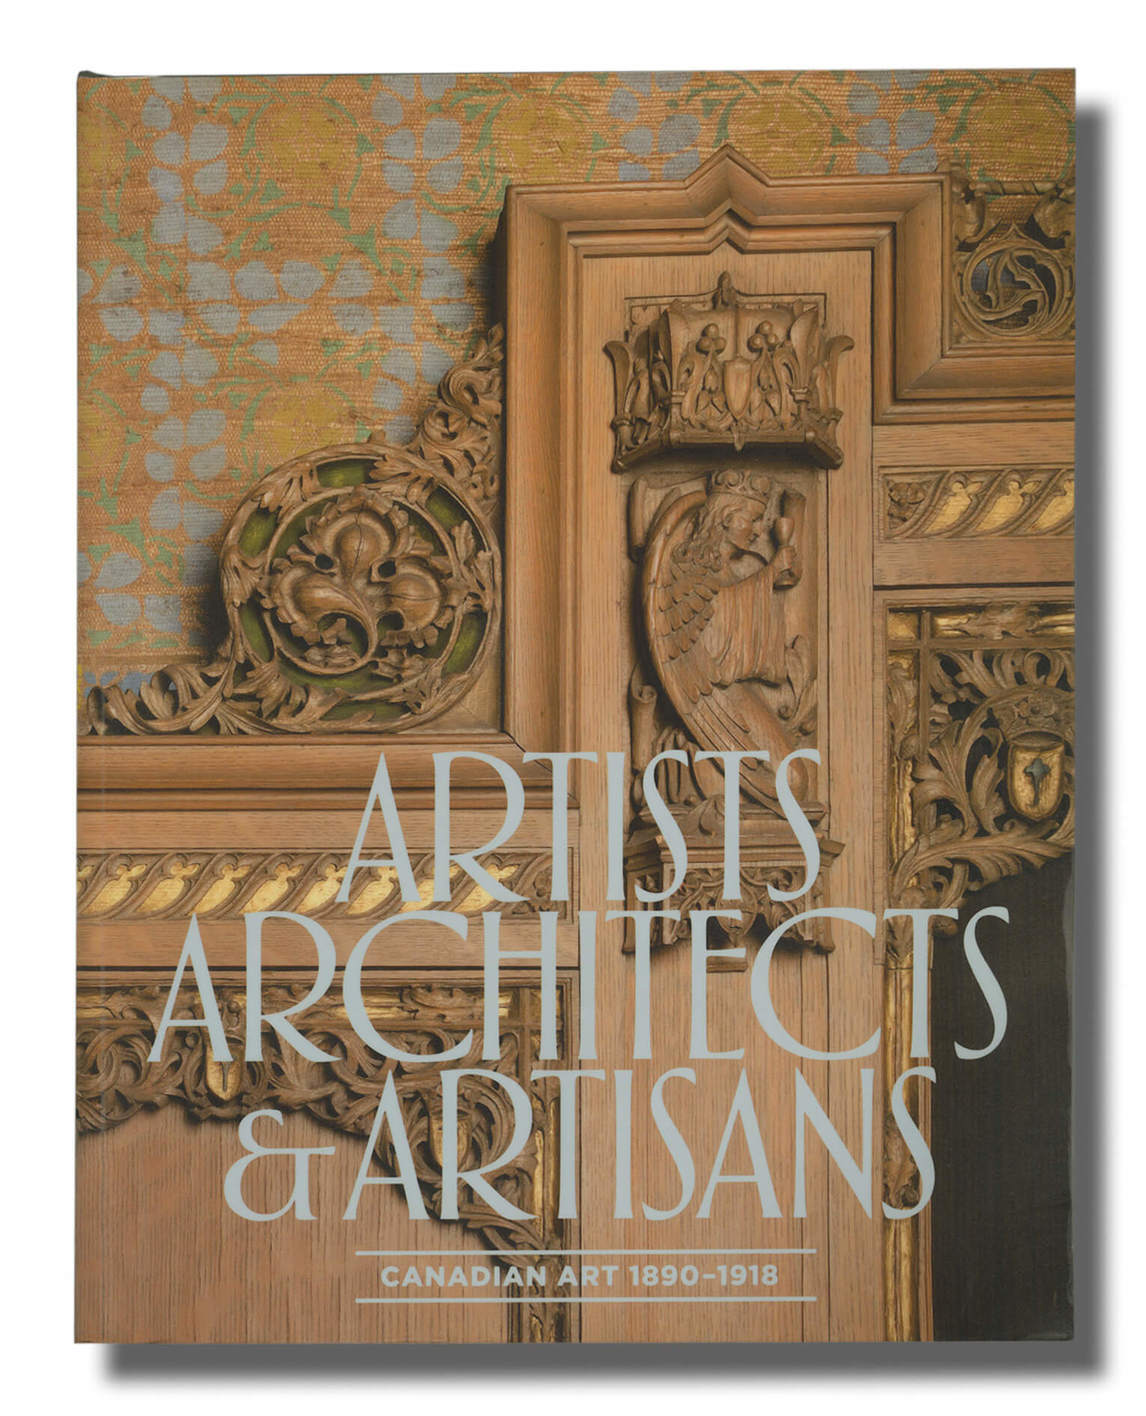 Exhibition catalogue for Artists, Architects and Artisans: Canadian Art 1890–1918, 2013, National Gallery of Canada, Ottawa